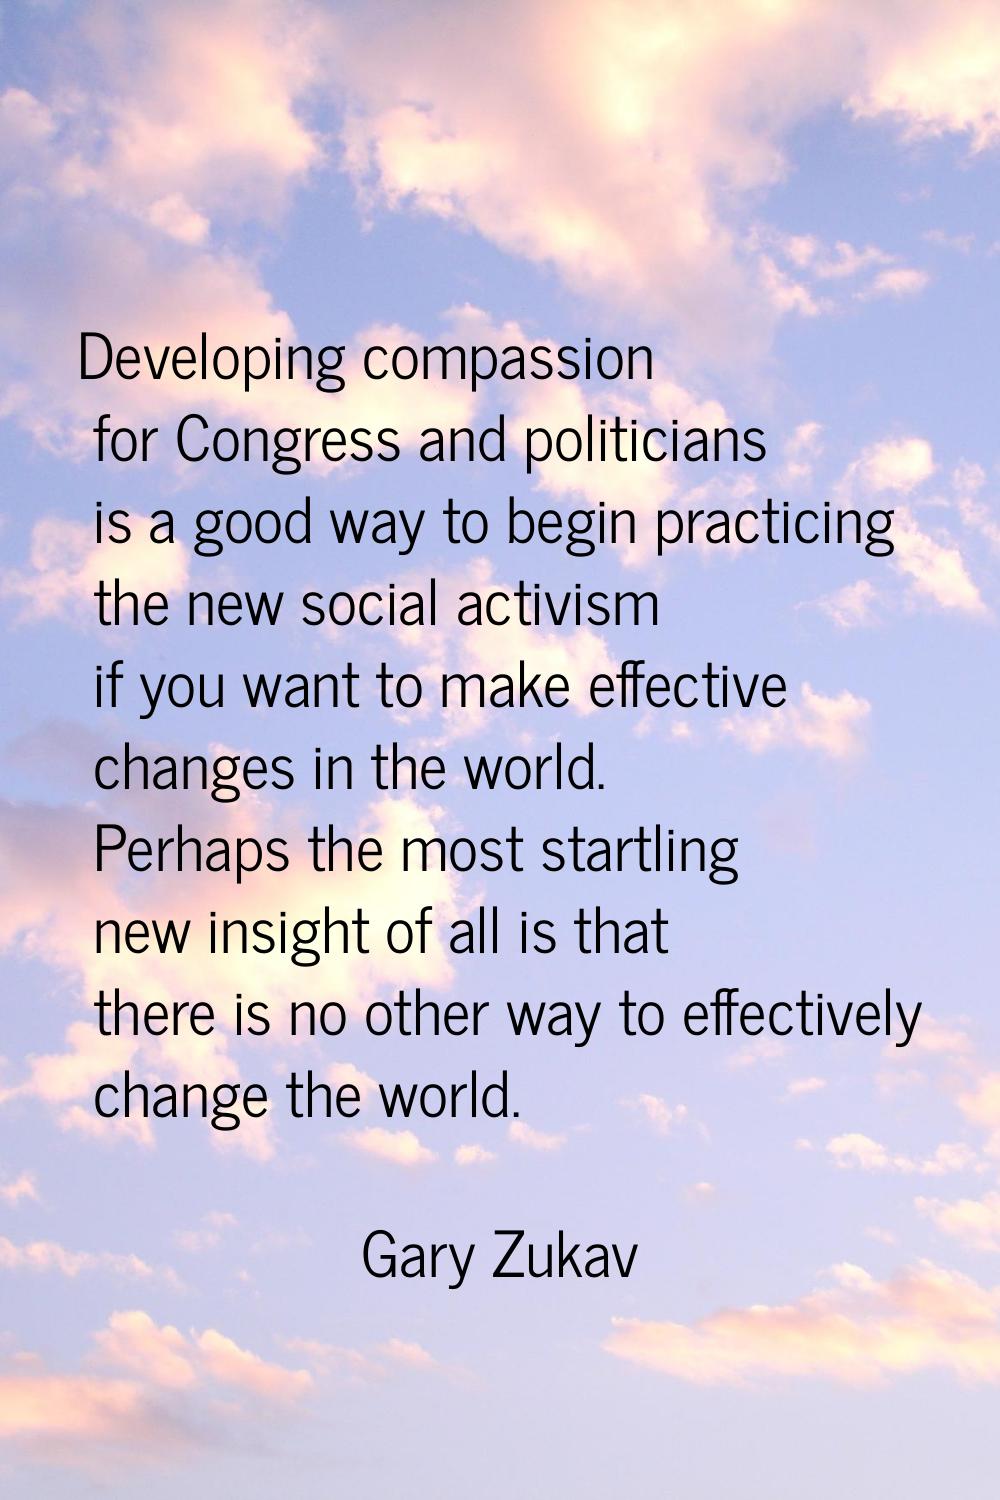 Developing compassion for Congress and politicians is a good way to begin practicing the new social